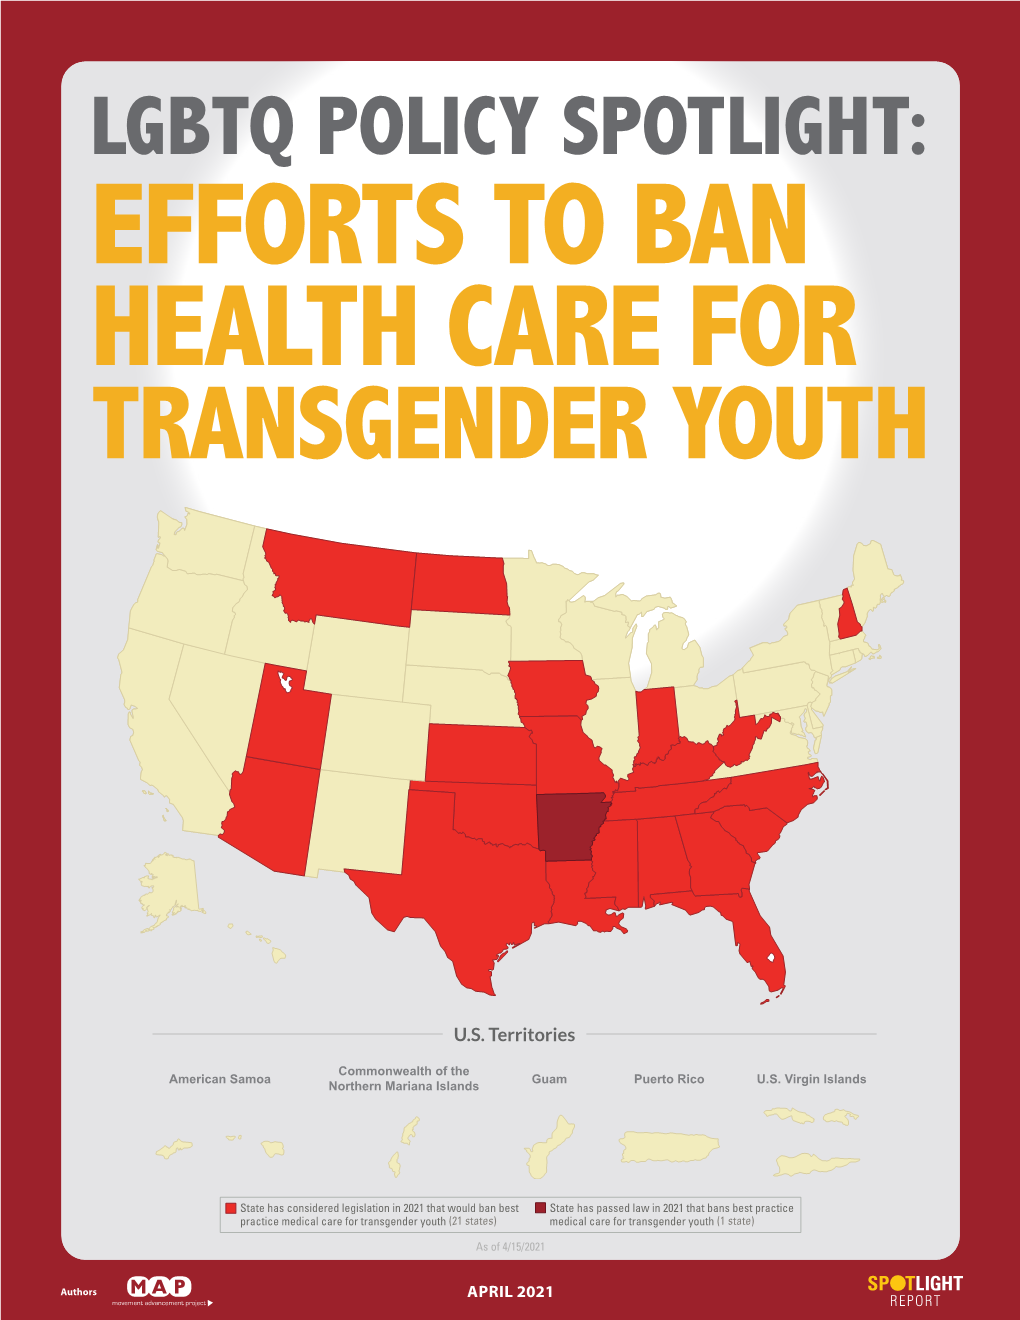 Efforts to Ban Health Care for Transgender Youth